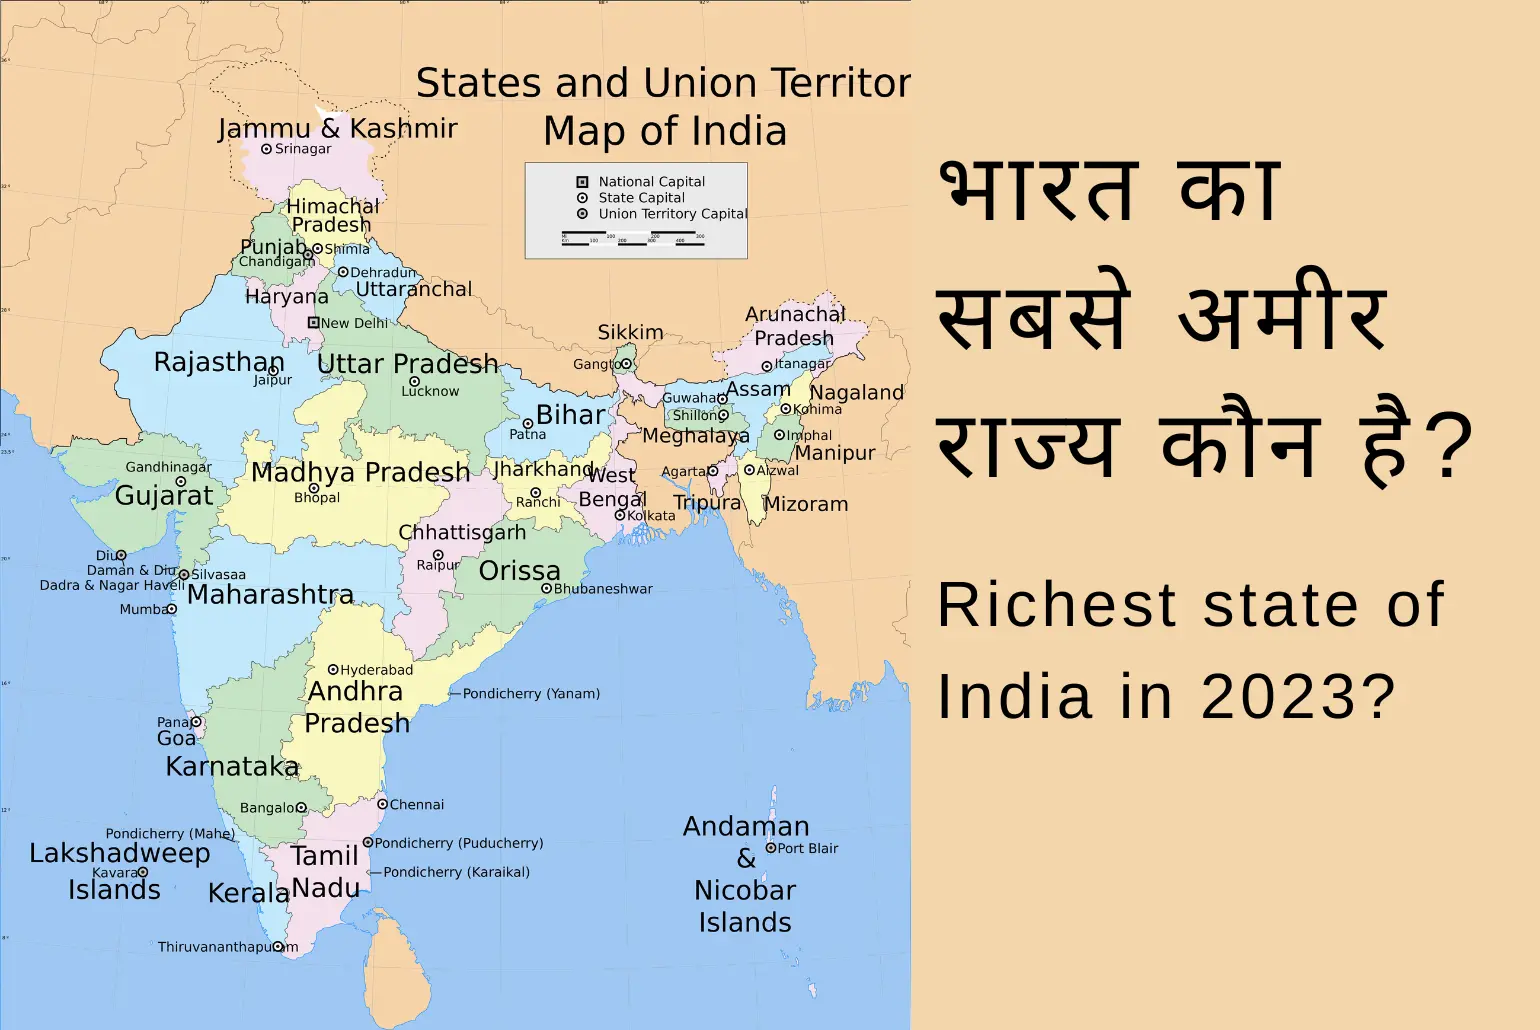 Richest state of India